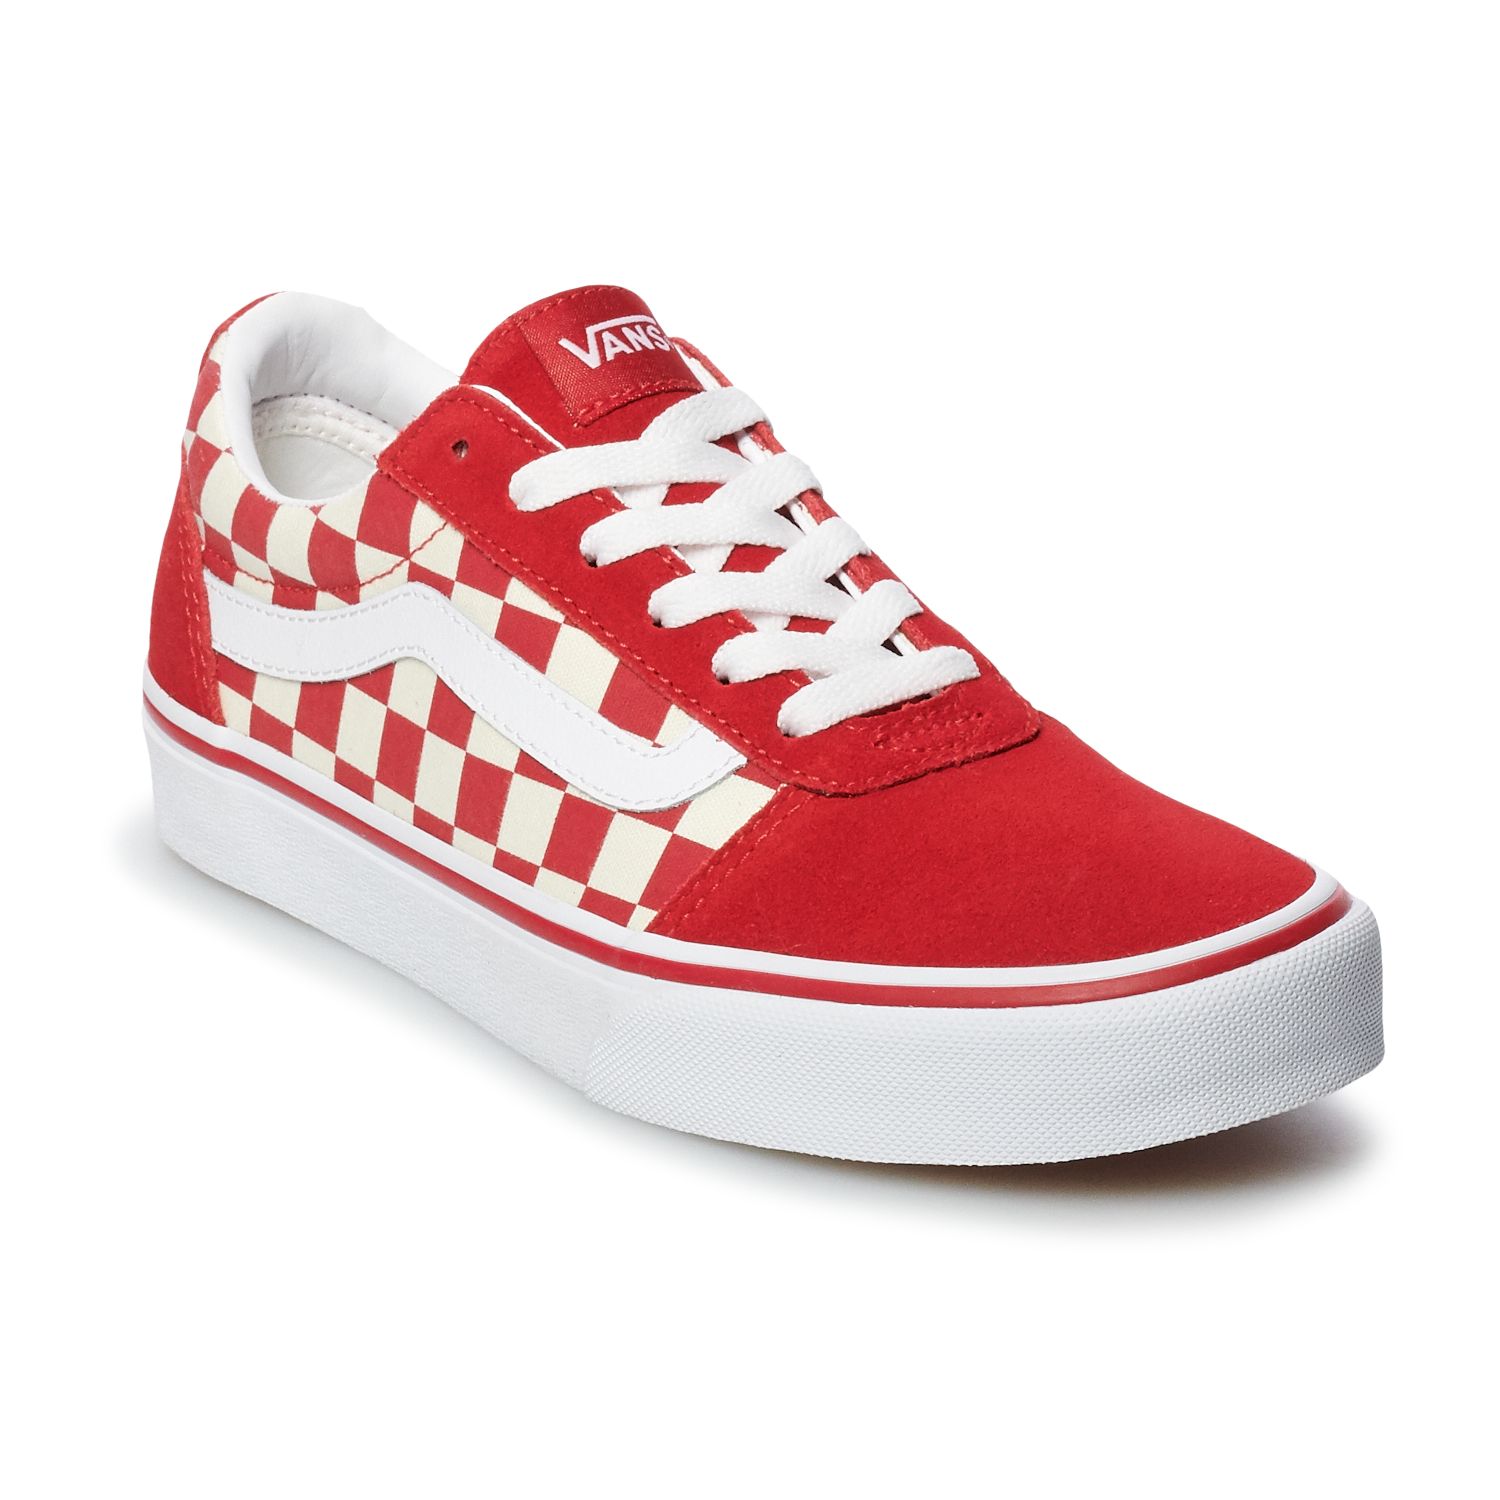 womens red vans size 